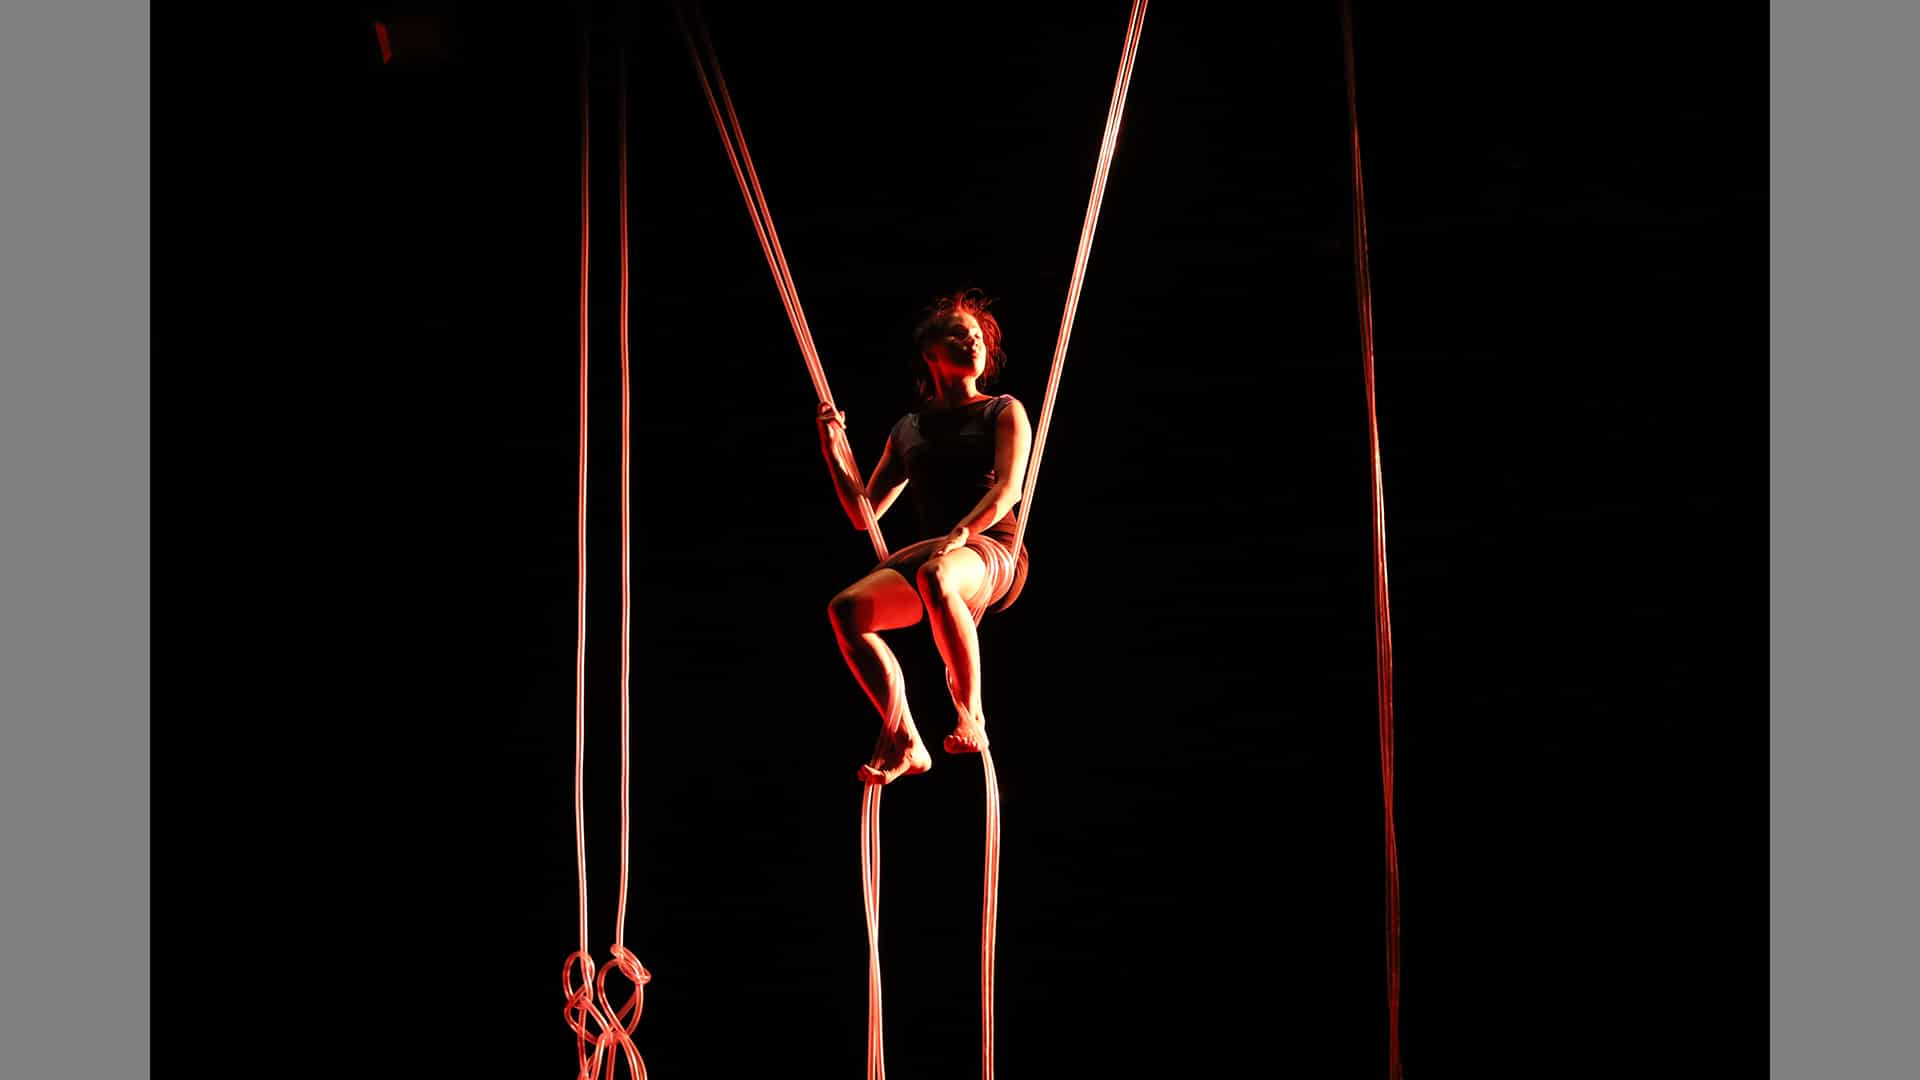 Performer sits high above the stage, in a swing made of plastic tubing